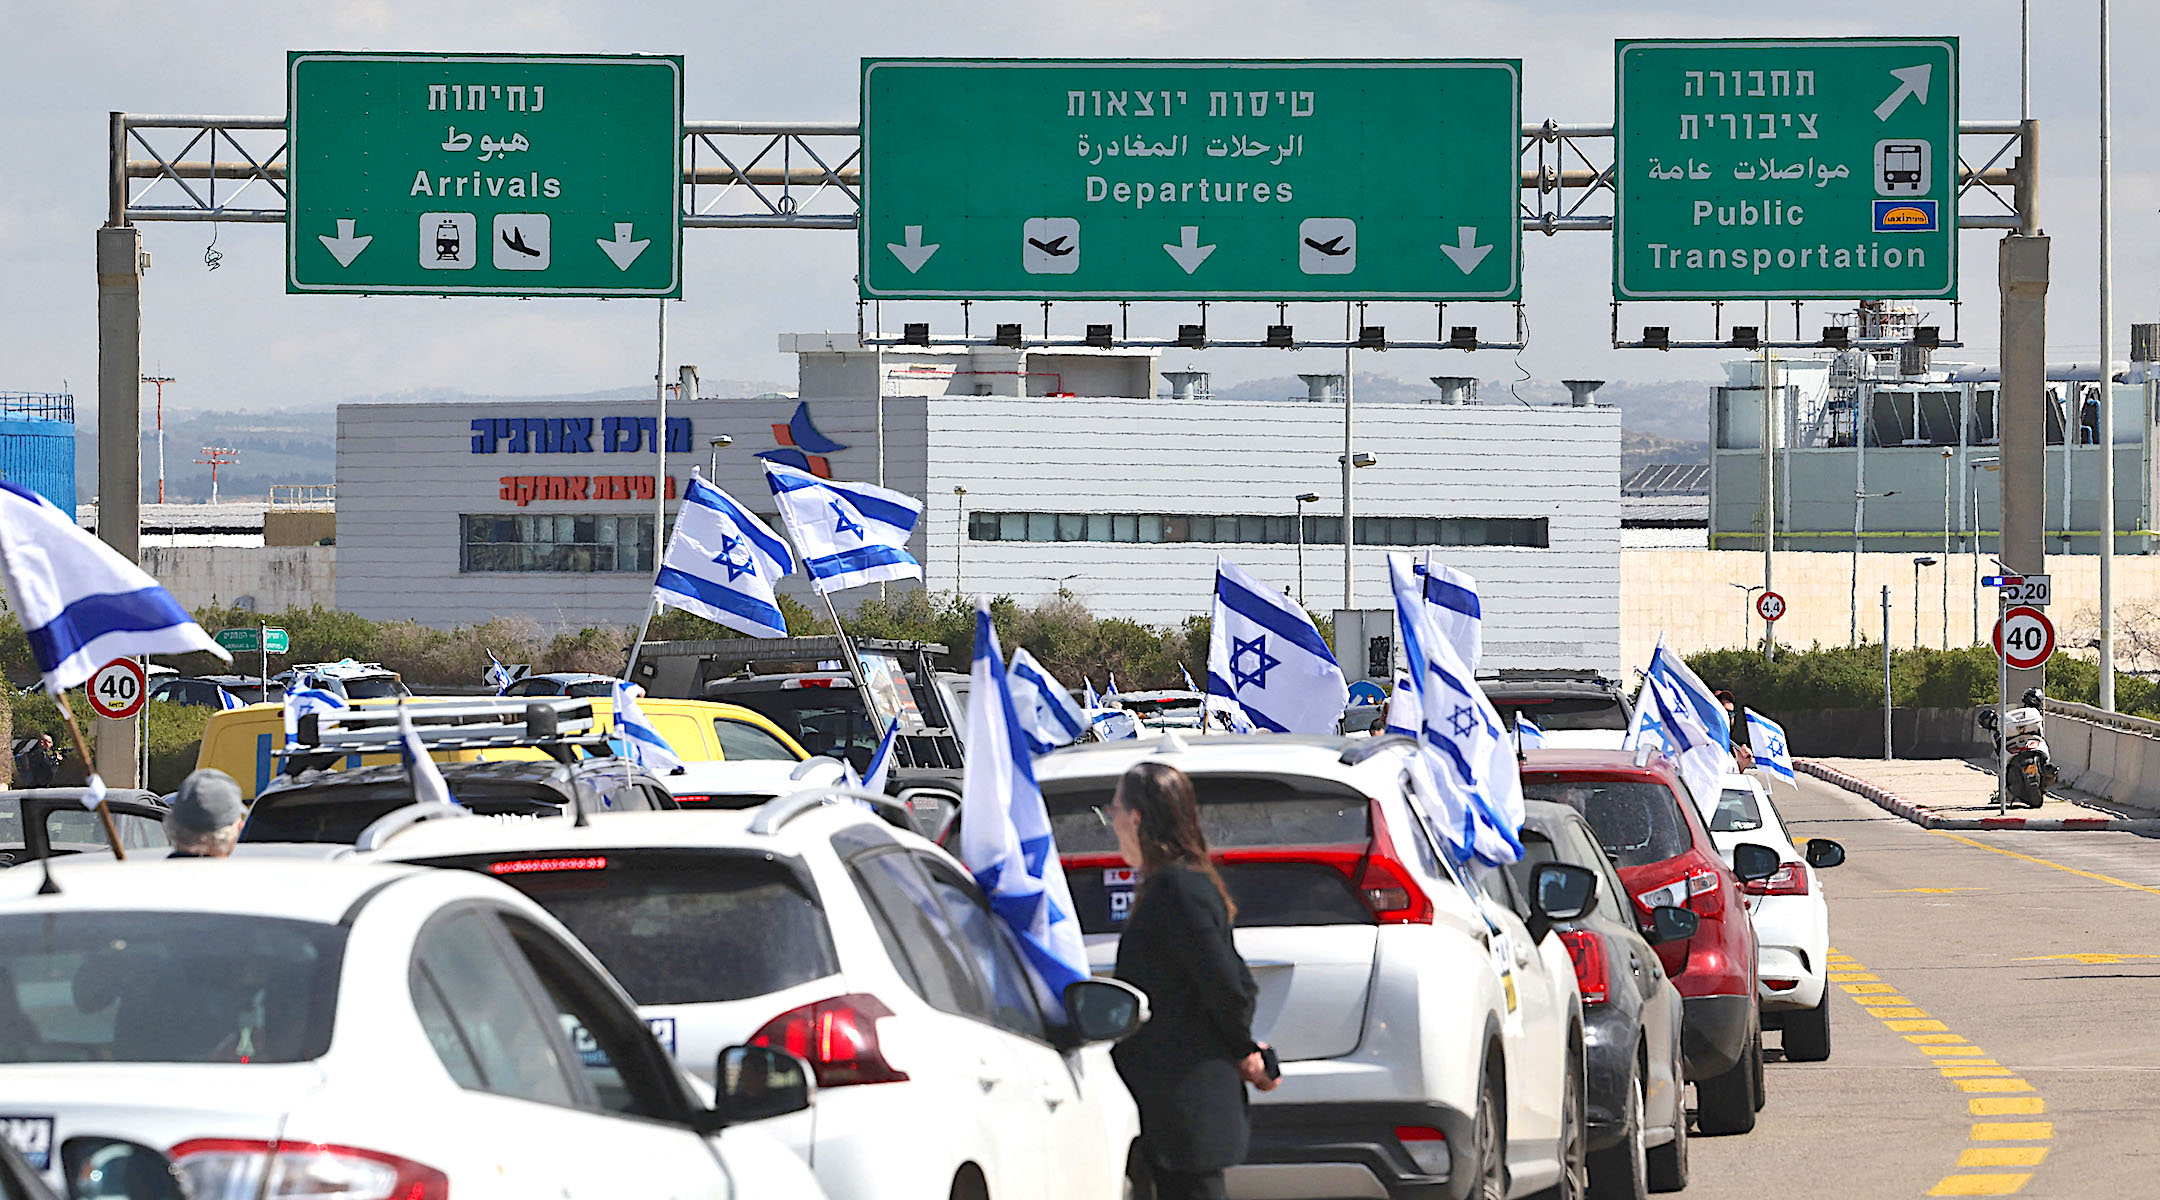 Israelis protesting against the government’s controversial judicial reform bill block the main road leading to the departures area of Ben Gurion Airport near Tel Aviv on March 9, 2023. (Ahmad Gharabli/AFP via Getty Images)